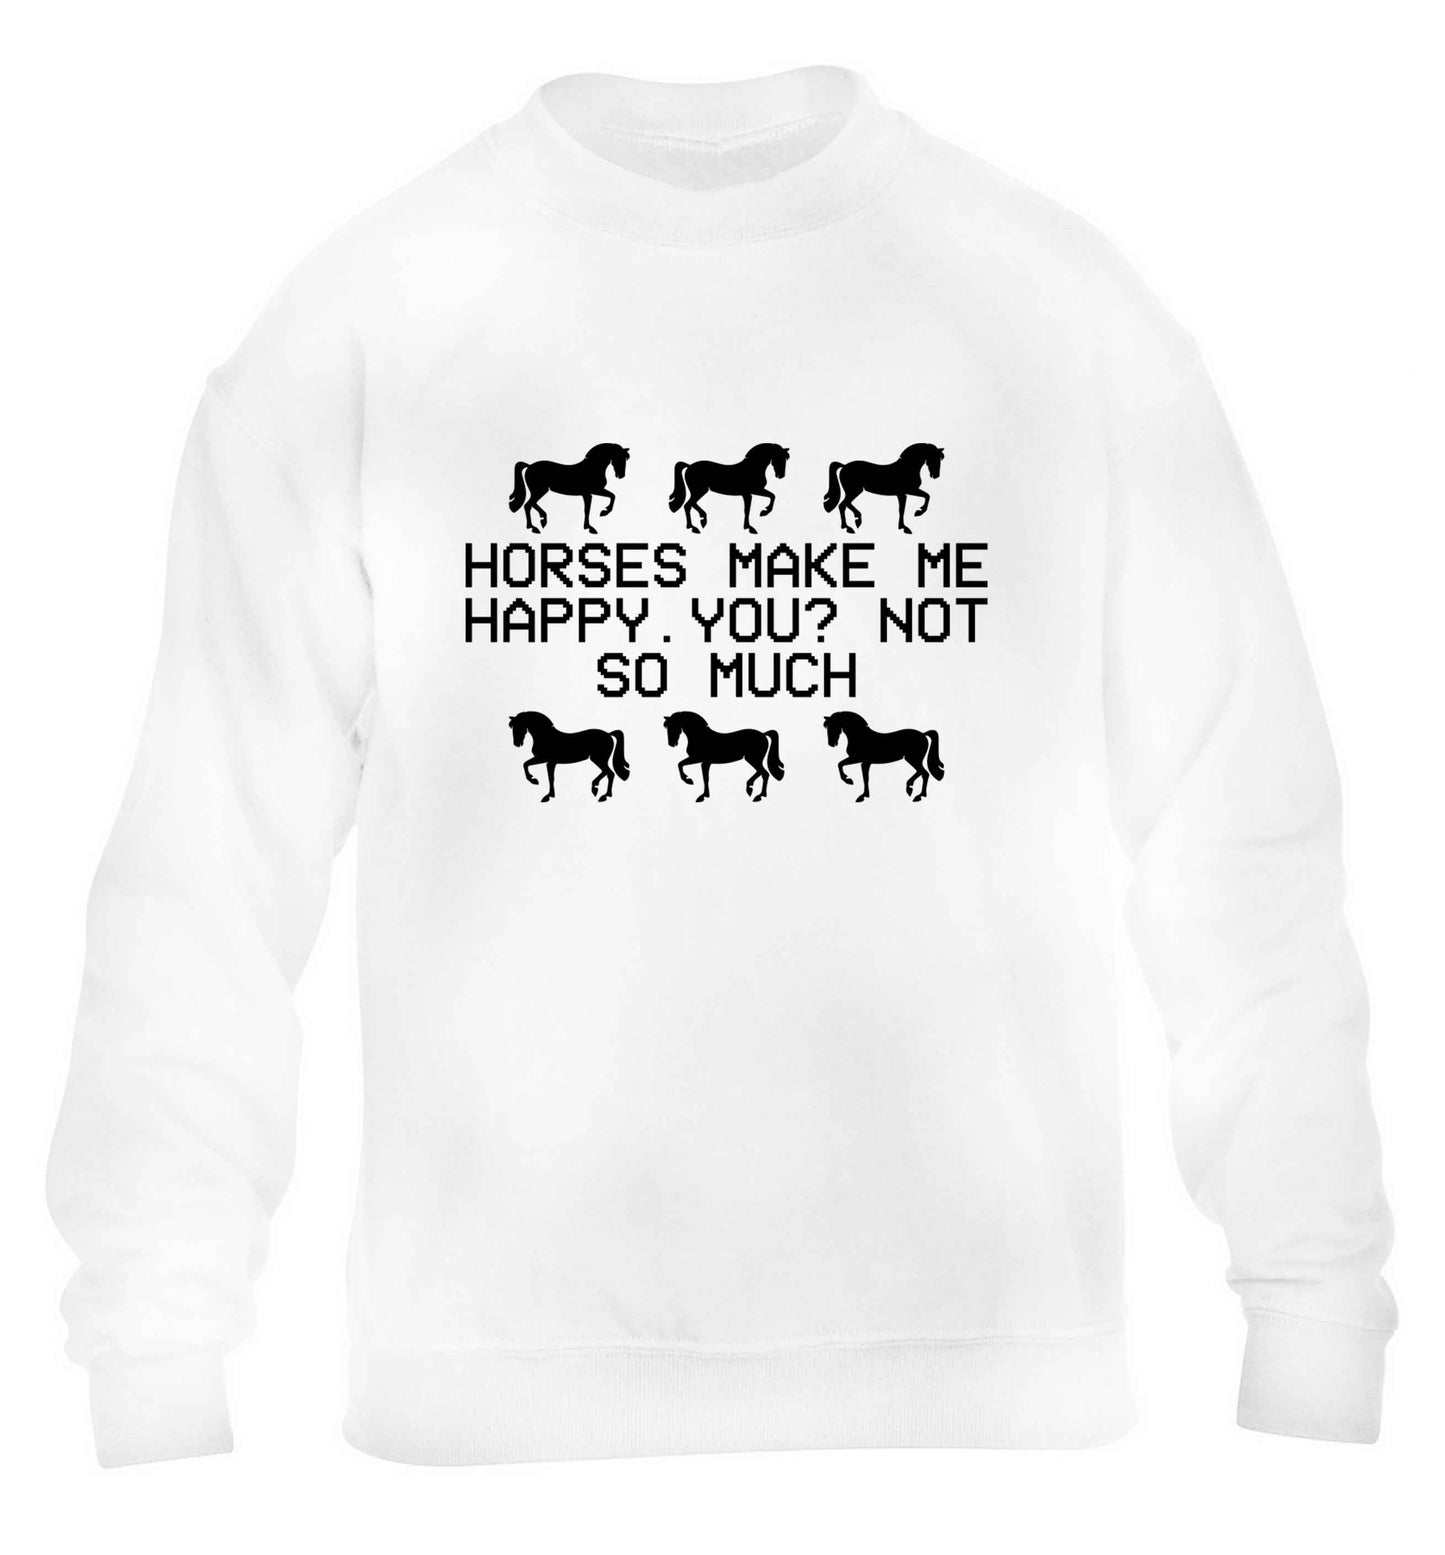 Horses make me happy, you not so much children's white sweater 12-13 Years